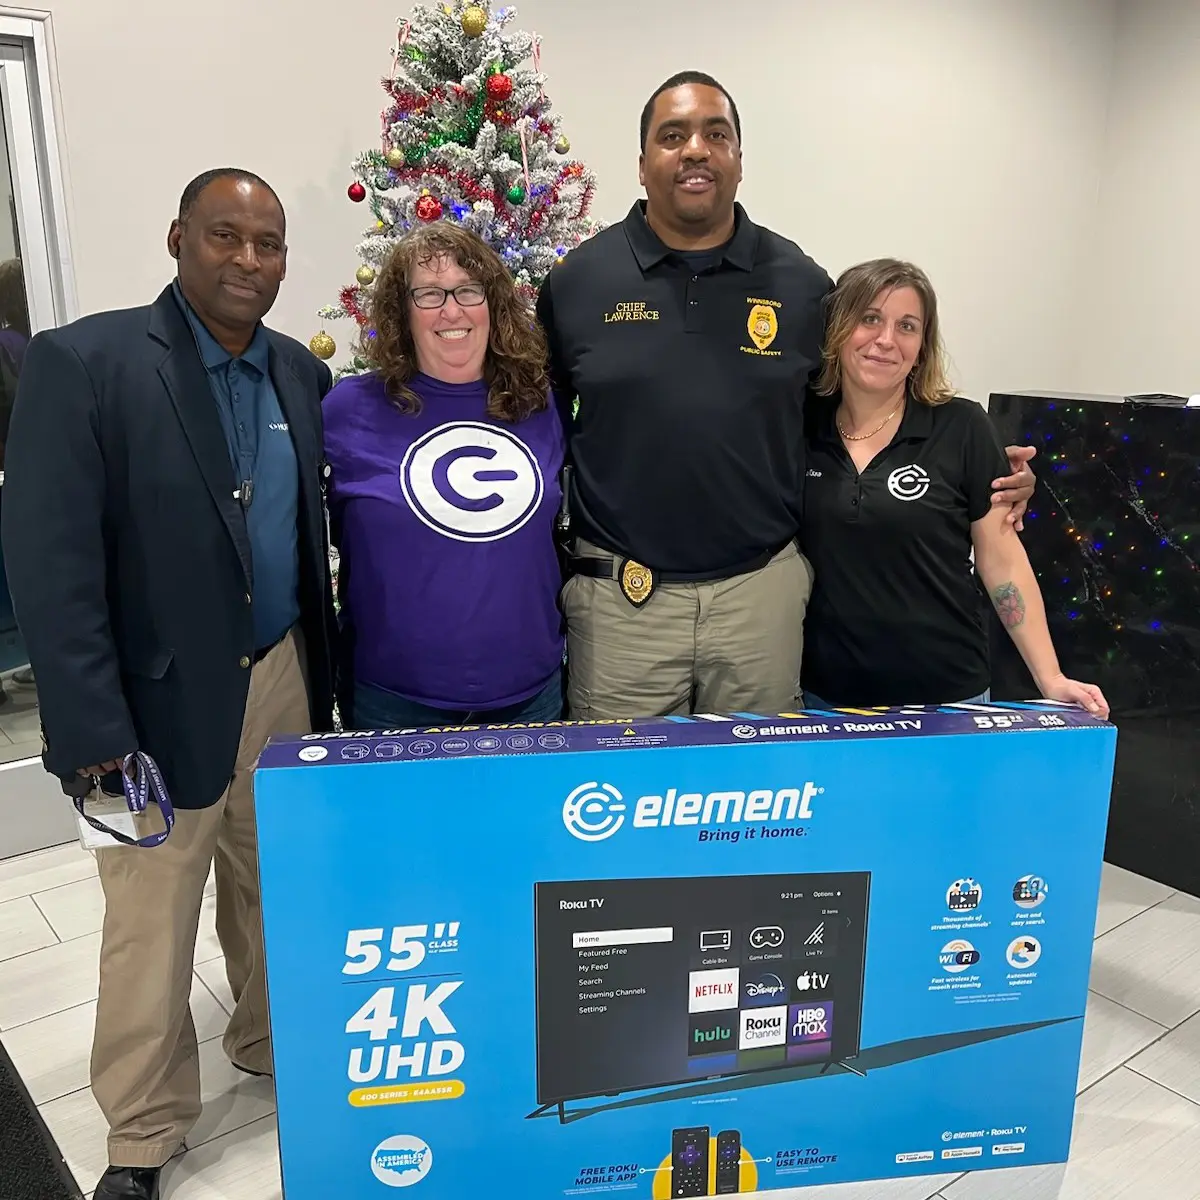 Four people posing with an Element TV box